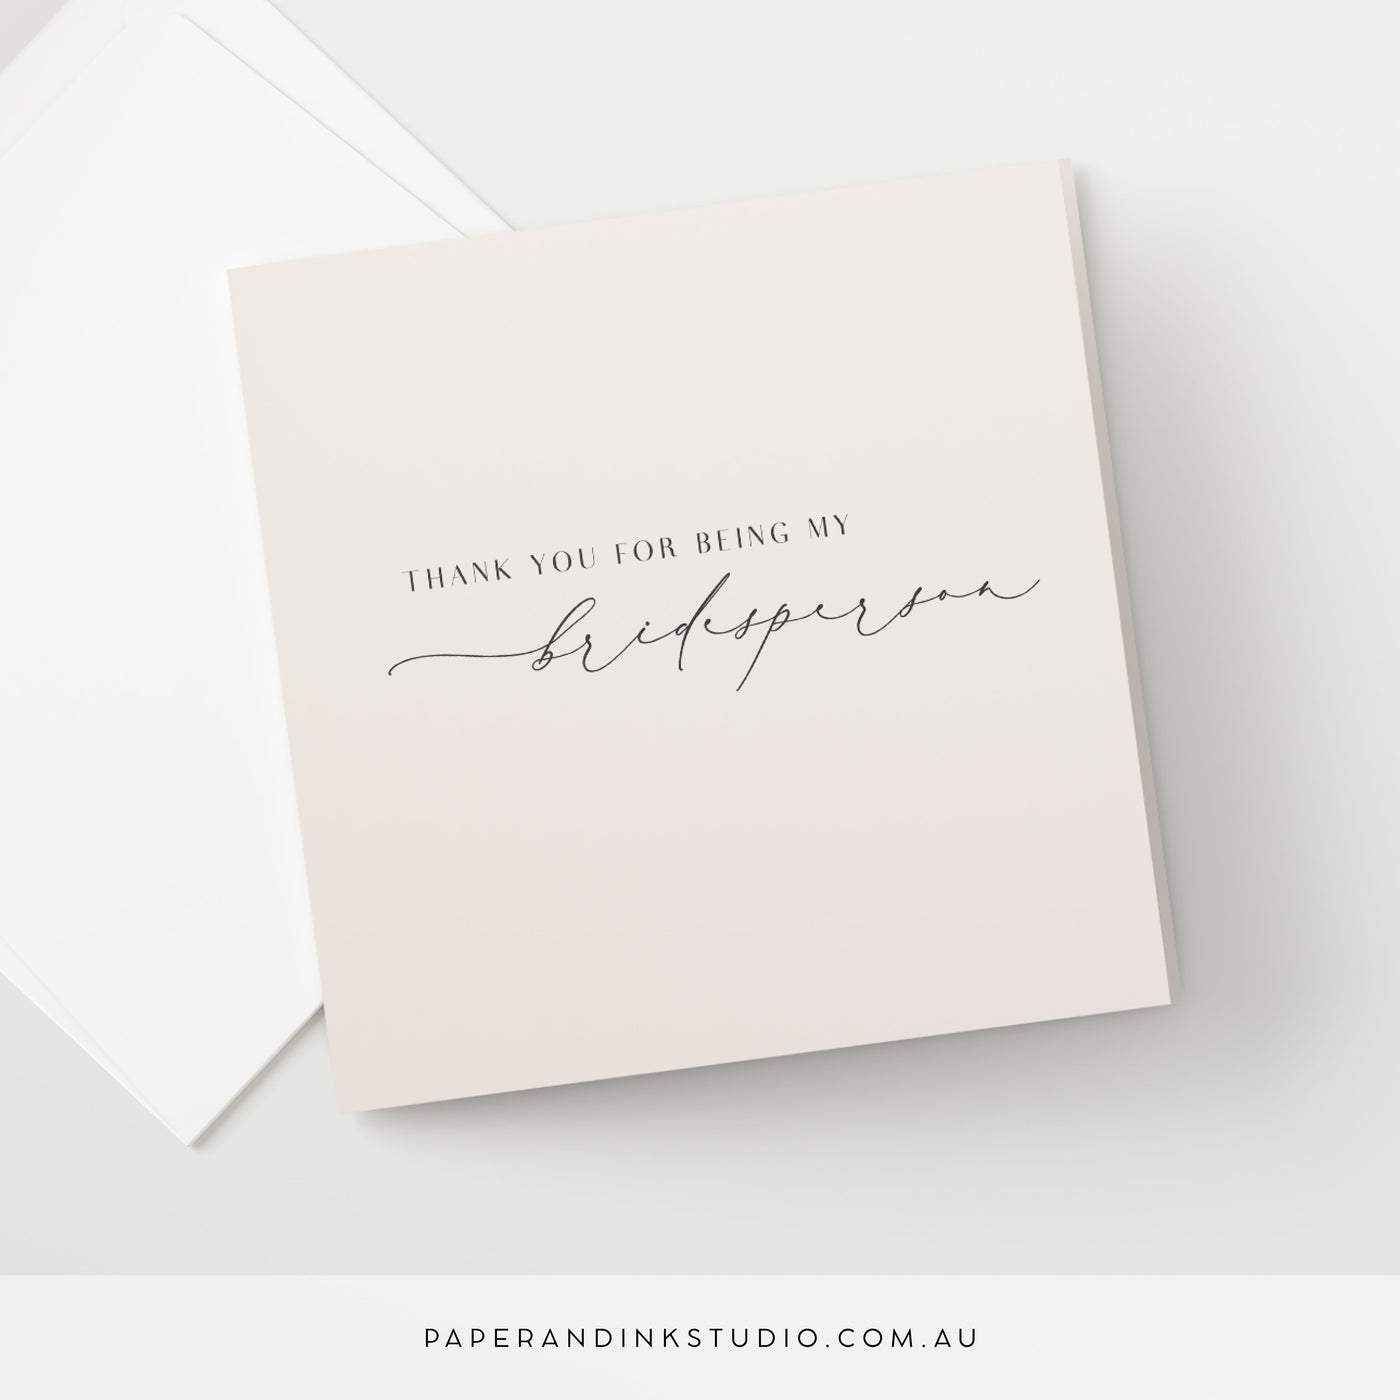 Thank You For Being My Bridesperson Card - Silk